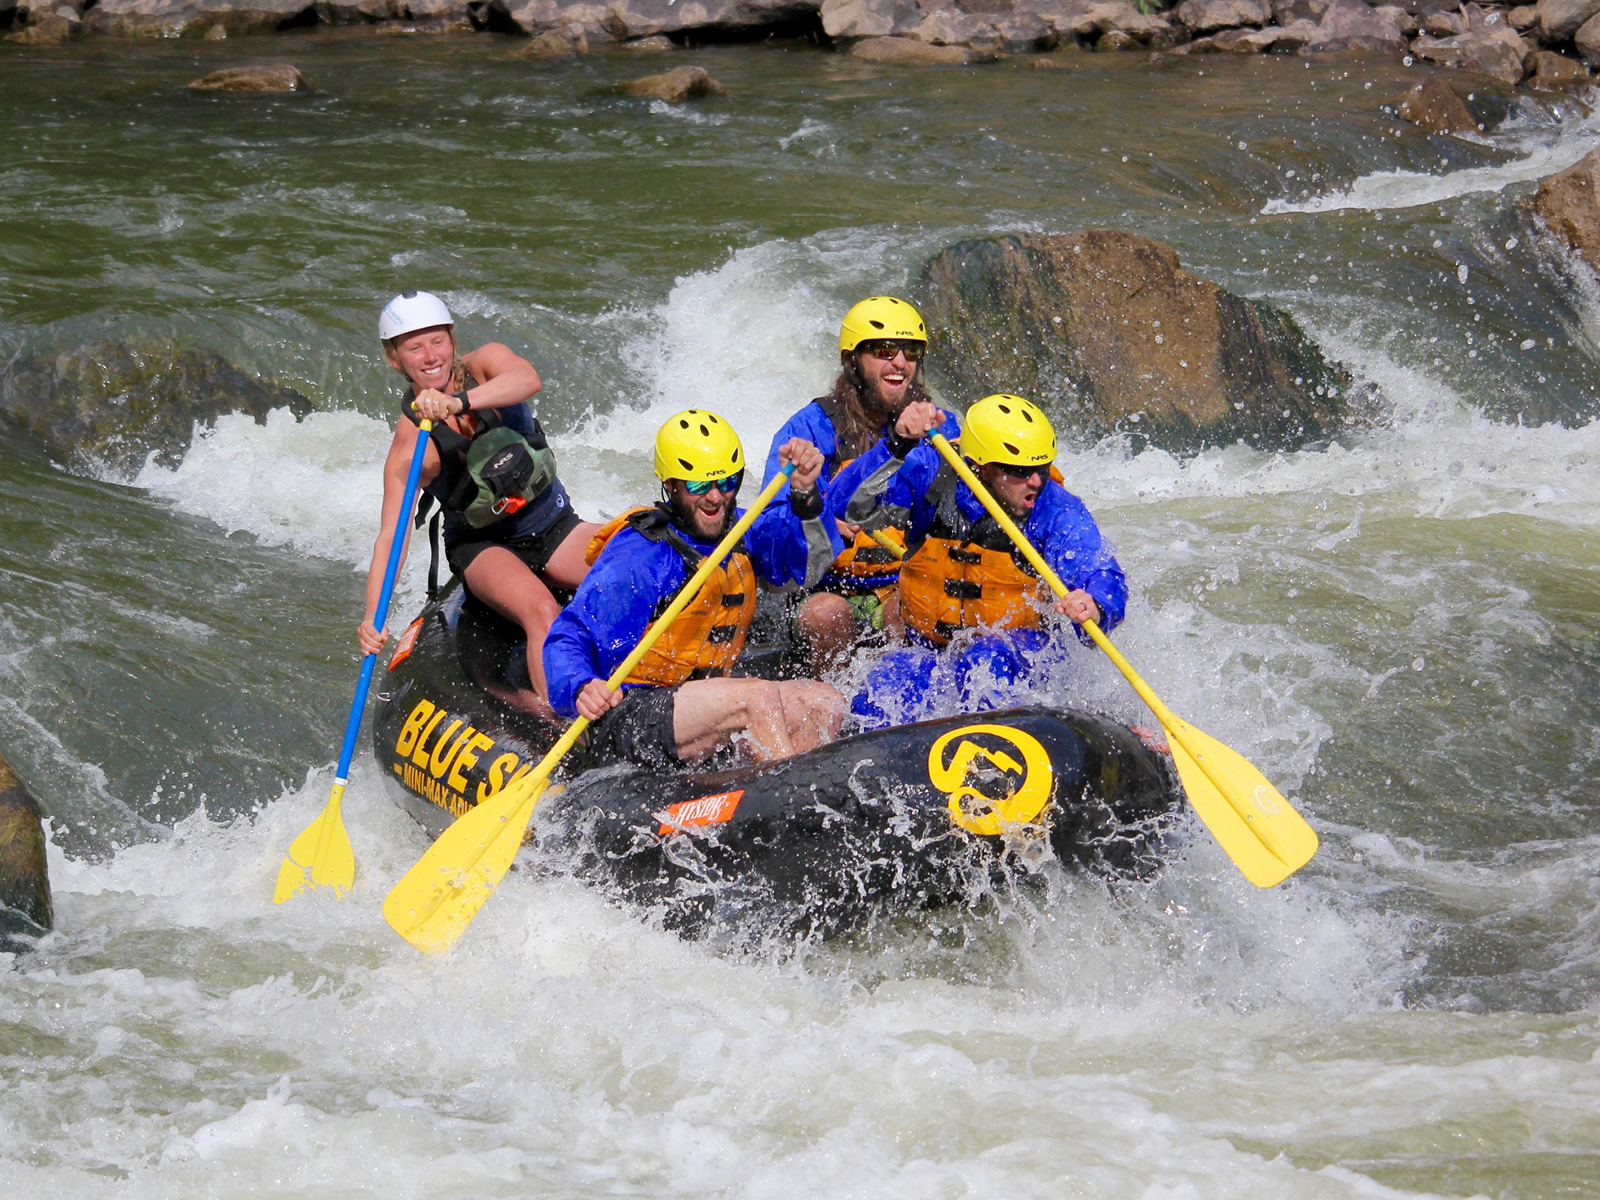 In this exhilarating image, three individuals, accompanied by their guide, expertly navigate a Mini Max through Class III waters. Adorned in vibrant safety gear, they joyously experience the thrill of the rapids, their smiles radiating the sheer excitement of the adventure.